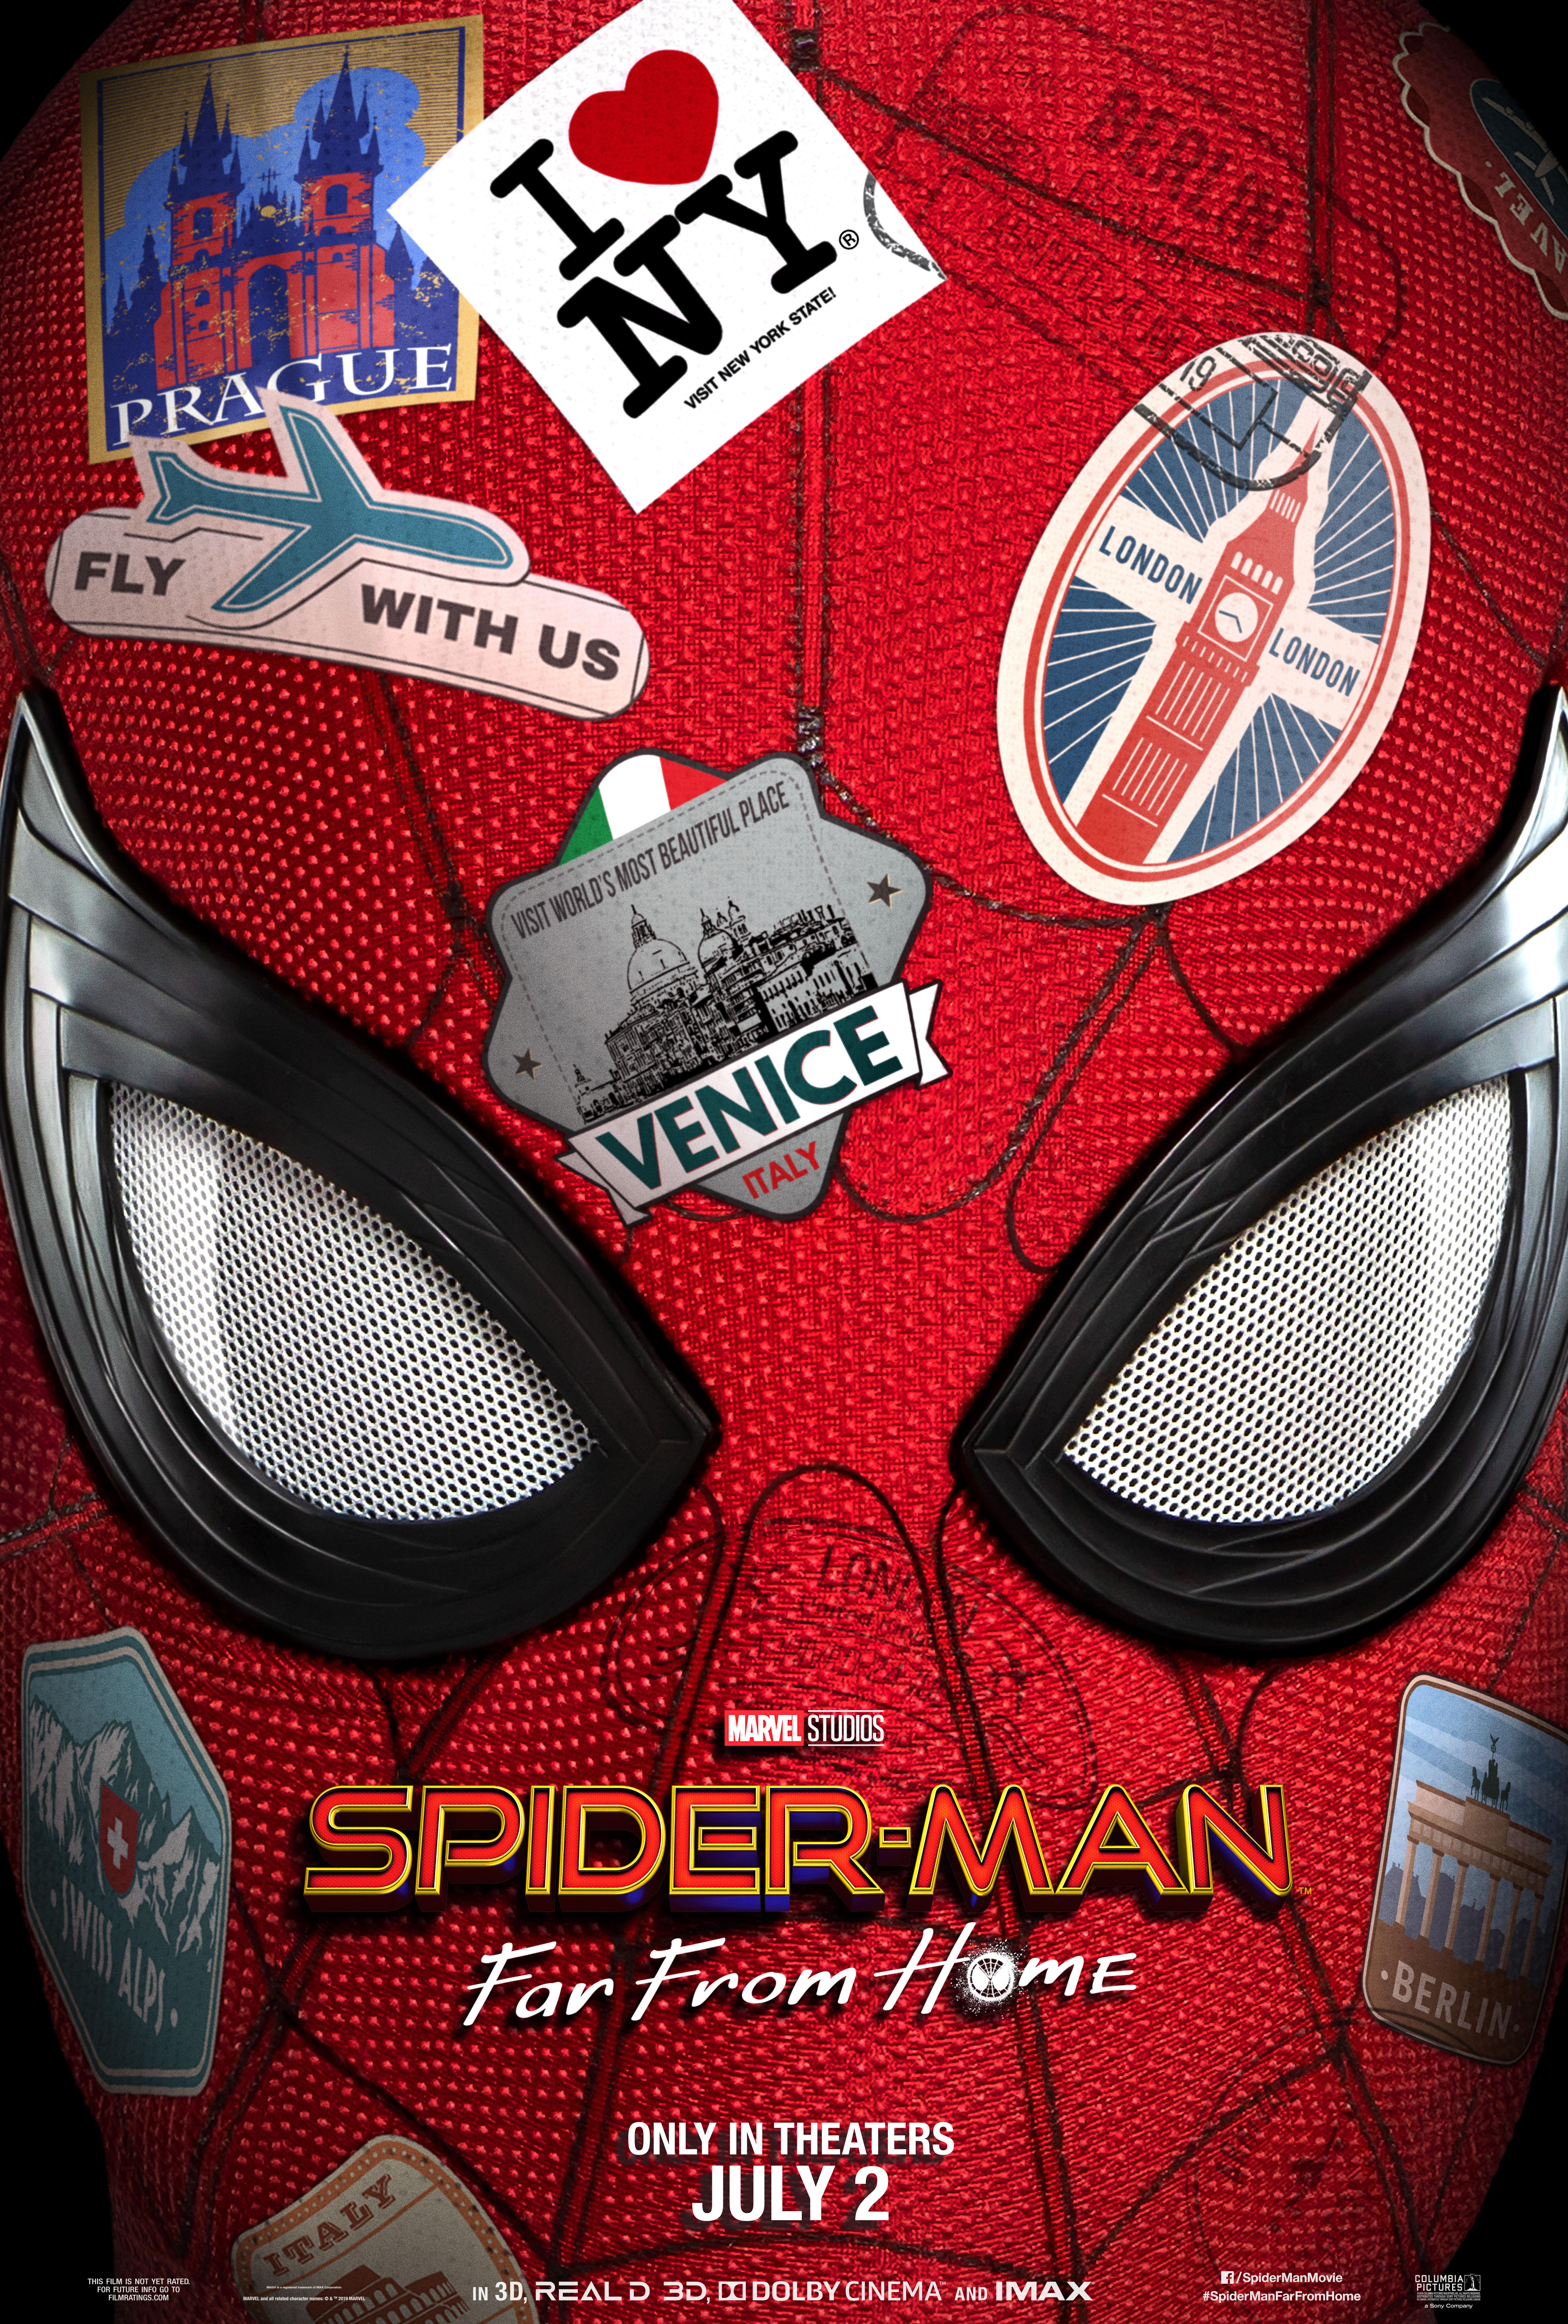 Spider-Man: Far From Home (July 2, 2019) - Join Peter Parker in his struggle to balance being a high school student and a superhero as he faces new threats while traveling abroad.